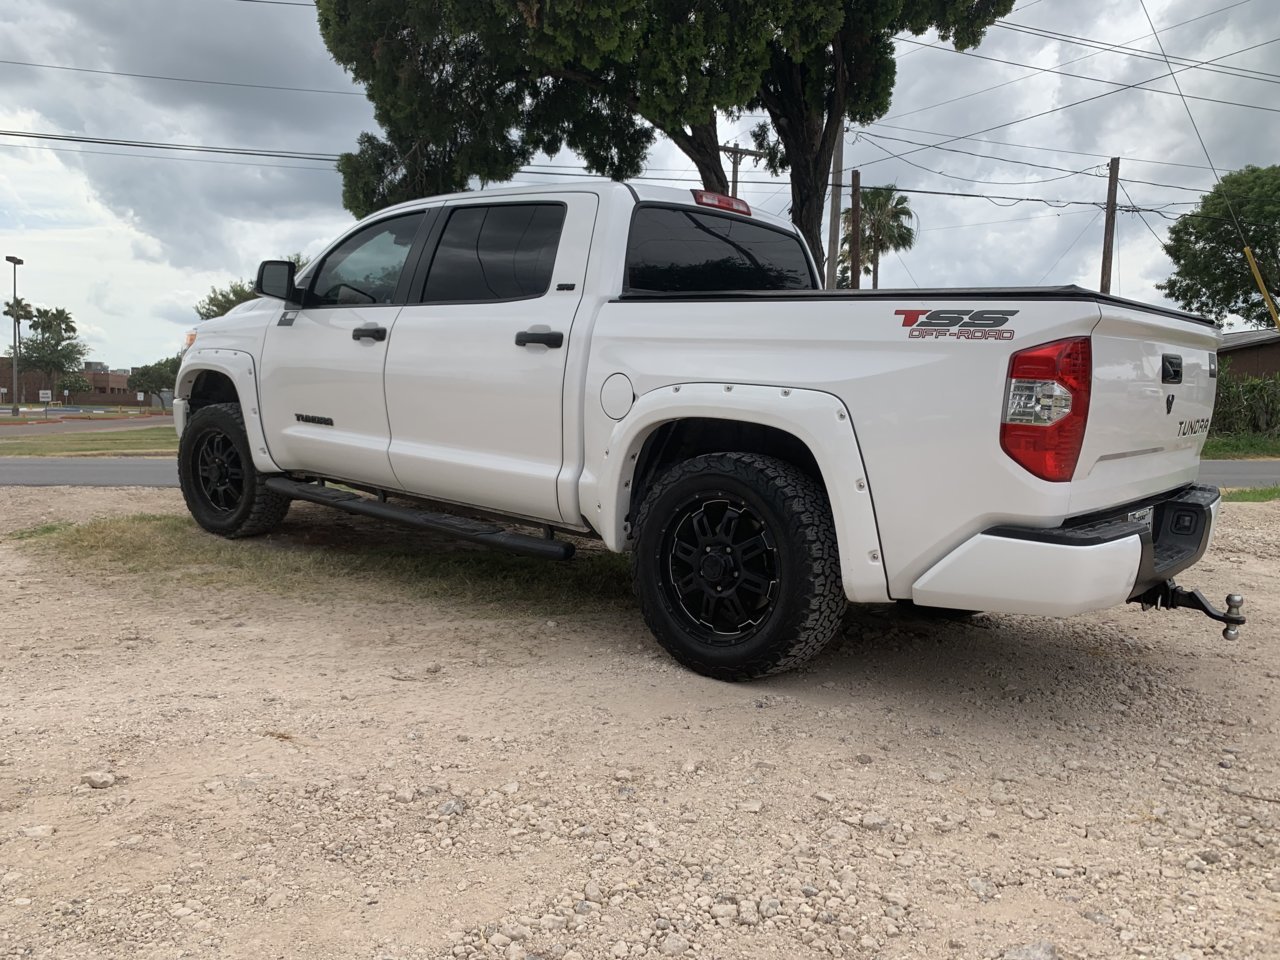 Chrome Delete Covers for Tundra Bumpers - BumperShellz | Page 68